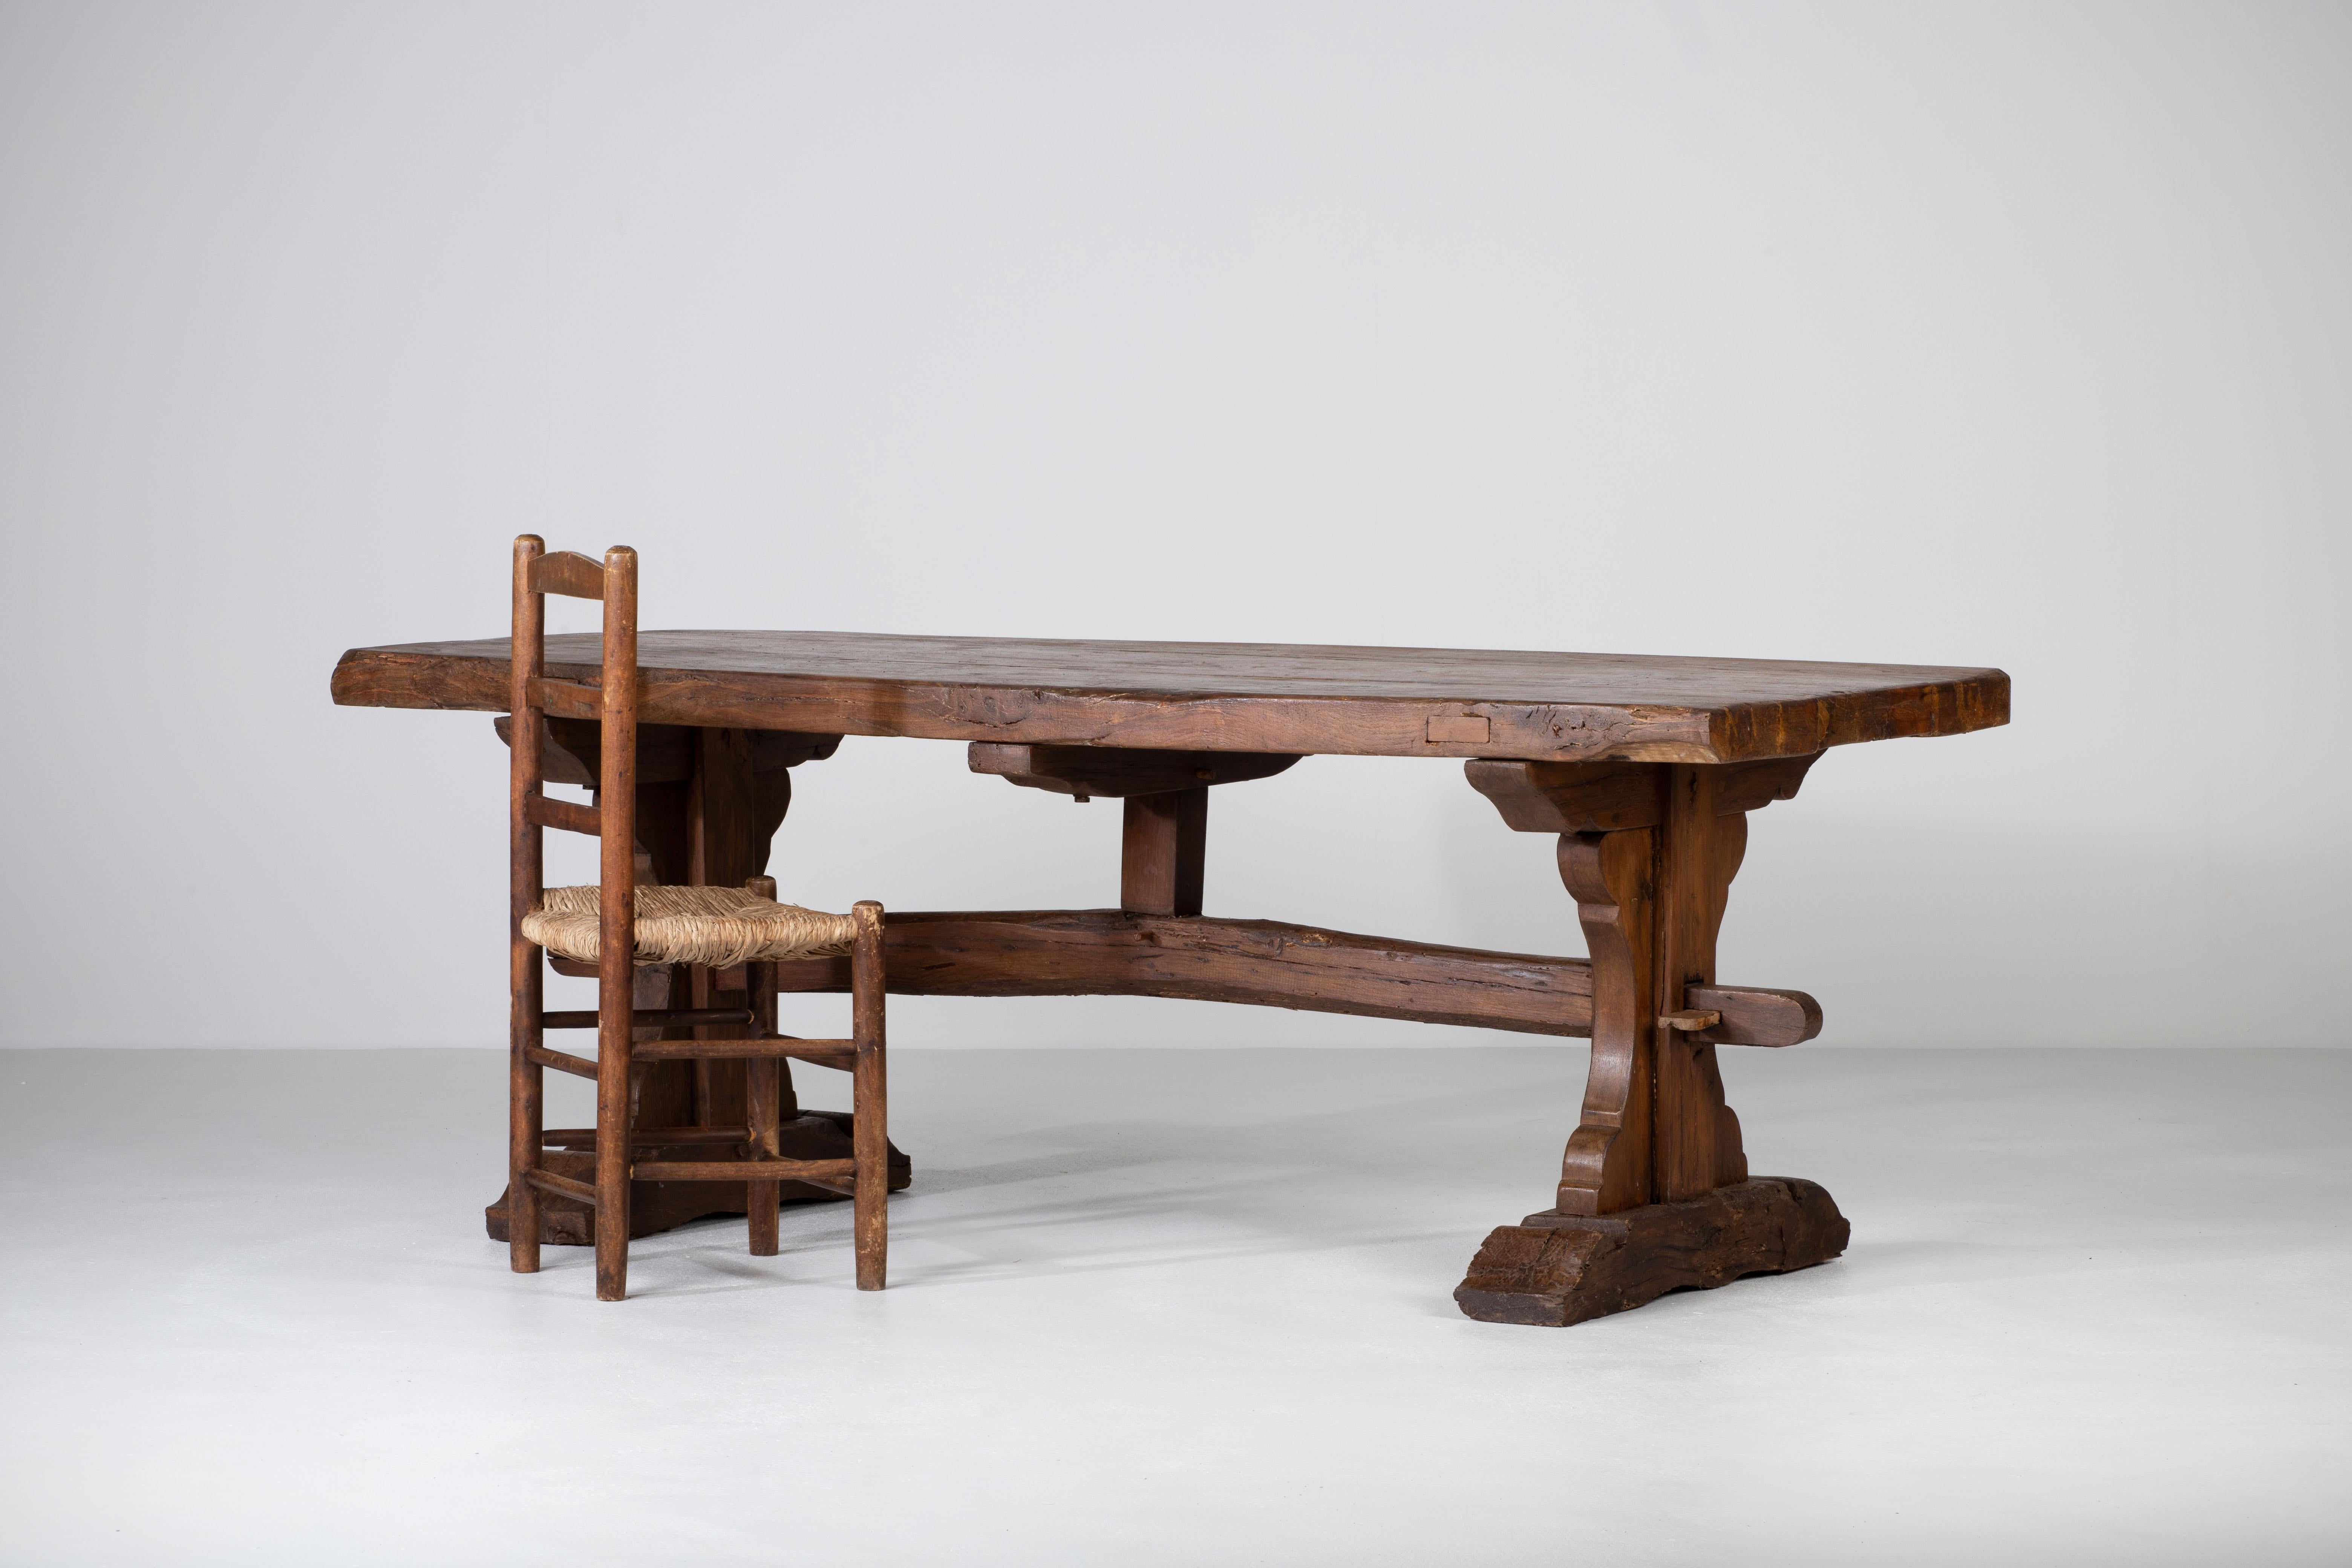 Authentic 19th farmhouse trestle dining table constructed from solid oak. 
It features a very nice patina, the large top is crafted from 2.5 inch thick oak timbers supported by a trestle style base. 
Good great old patina and a warm and worn